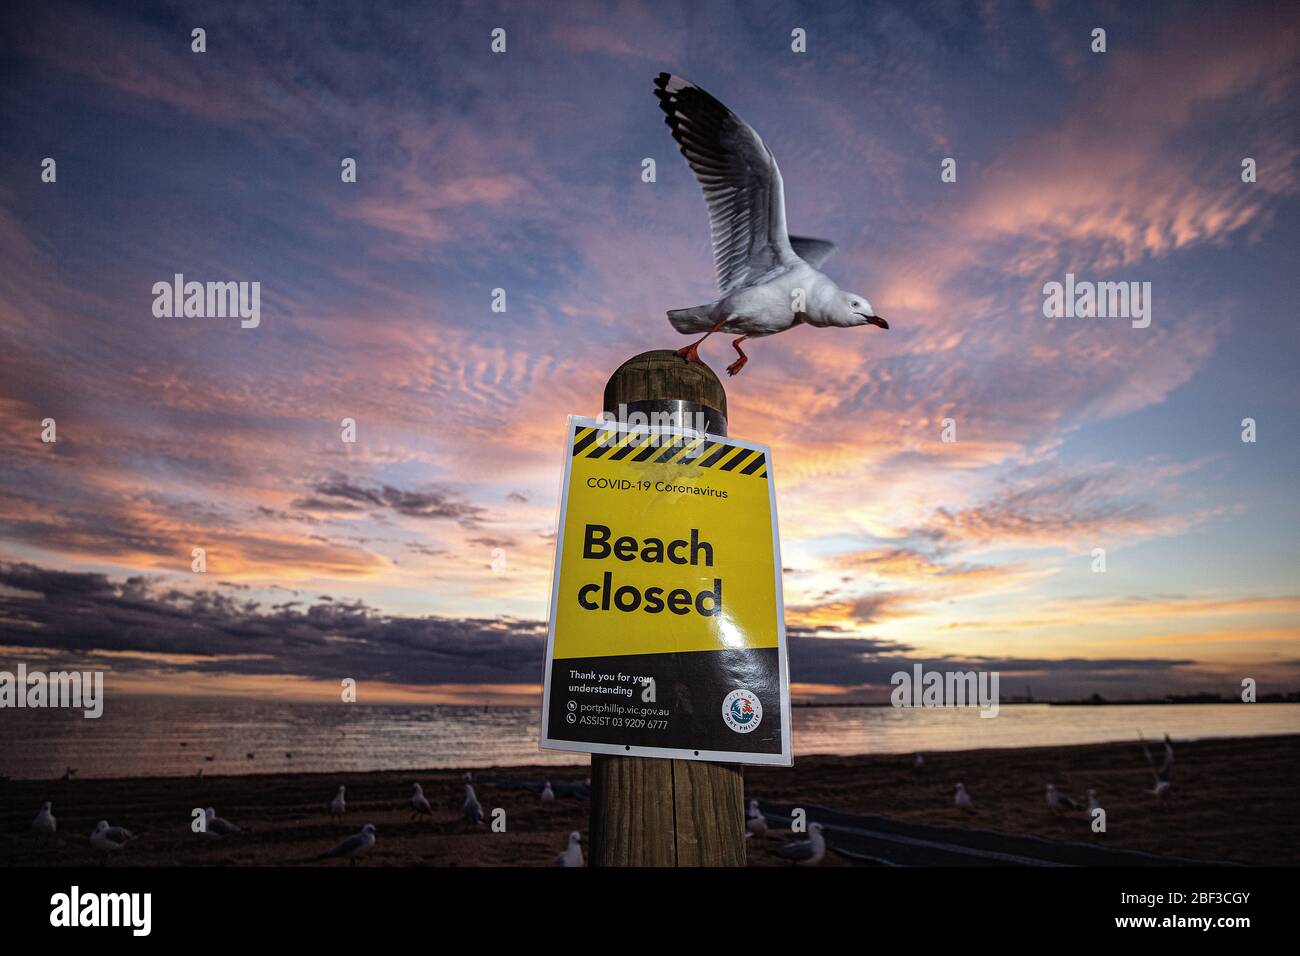 Covid-19, coronavirus, pandemic crisis in Melbourne Australia 2020. A 'Beach Closed' sign at St Kilda Beach Melbourne, closed due to the pandemic. Stock Photo